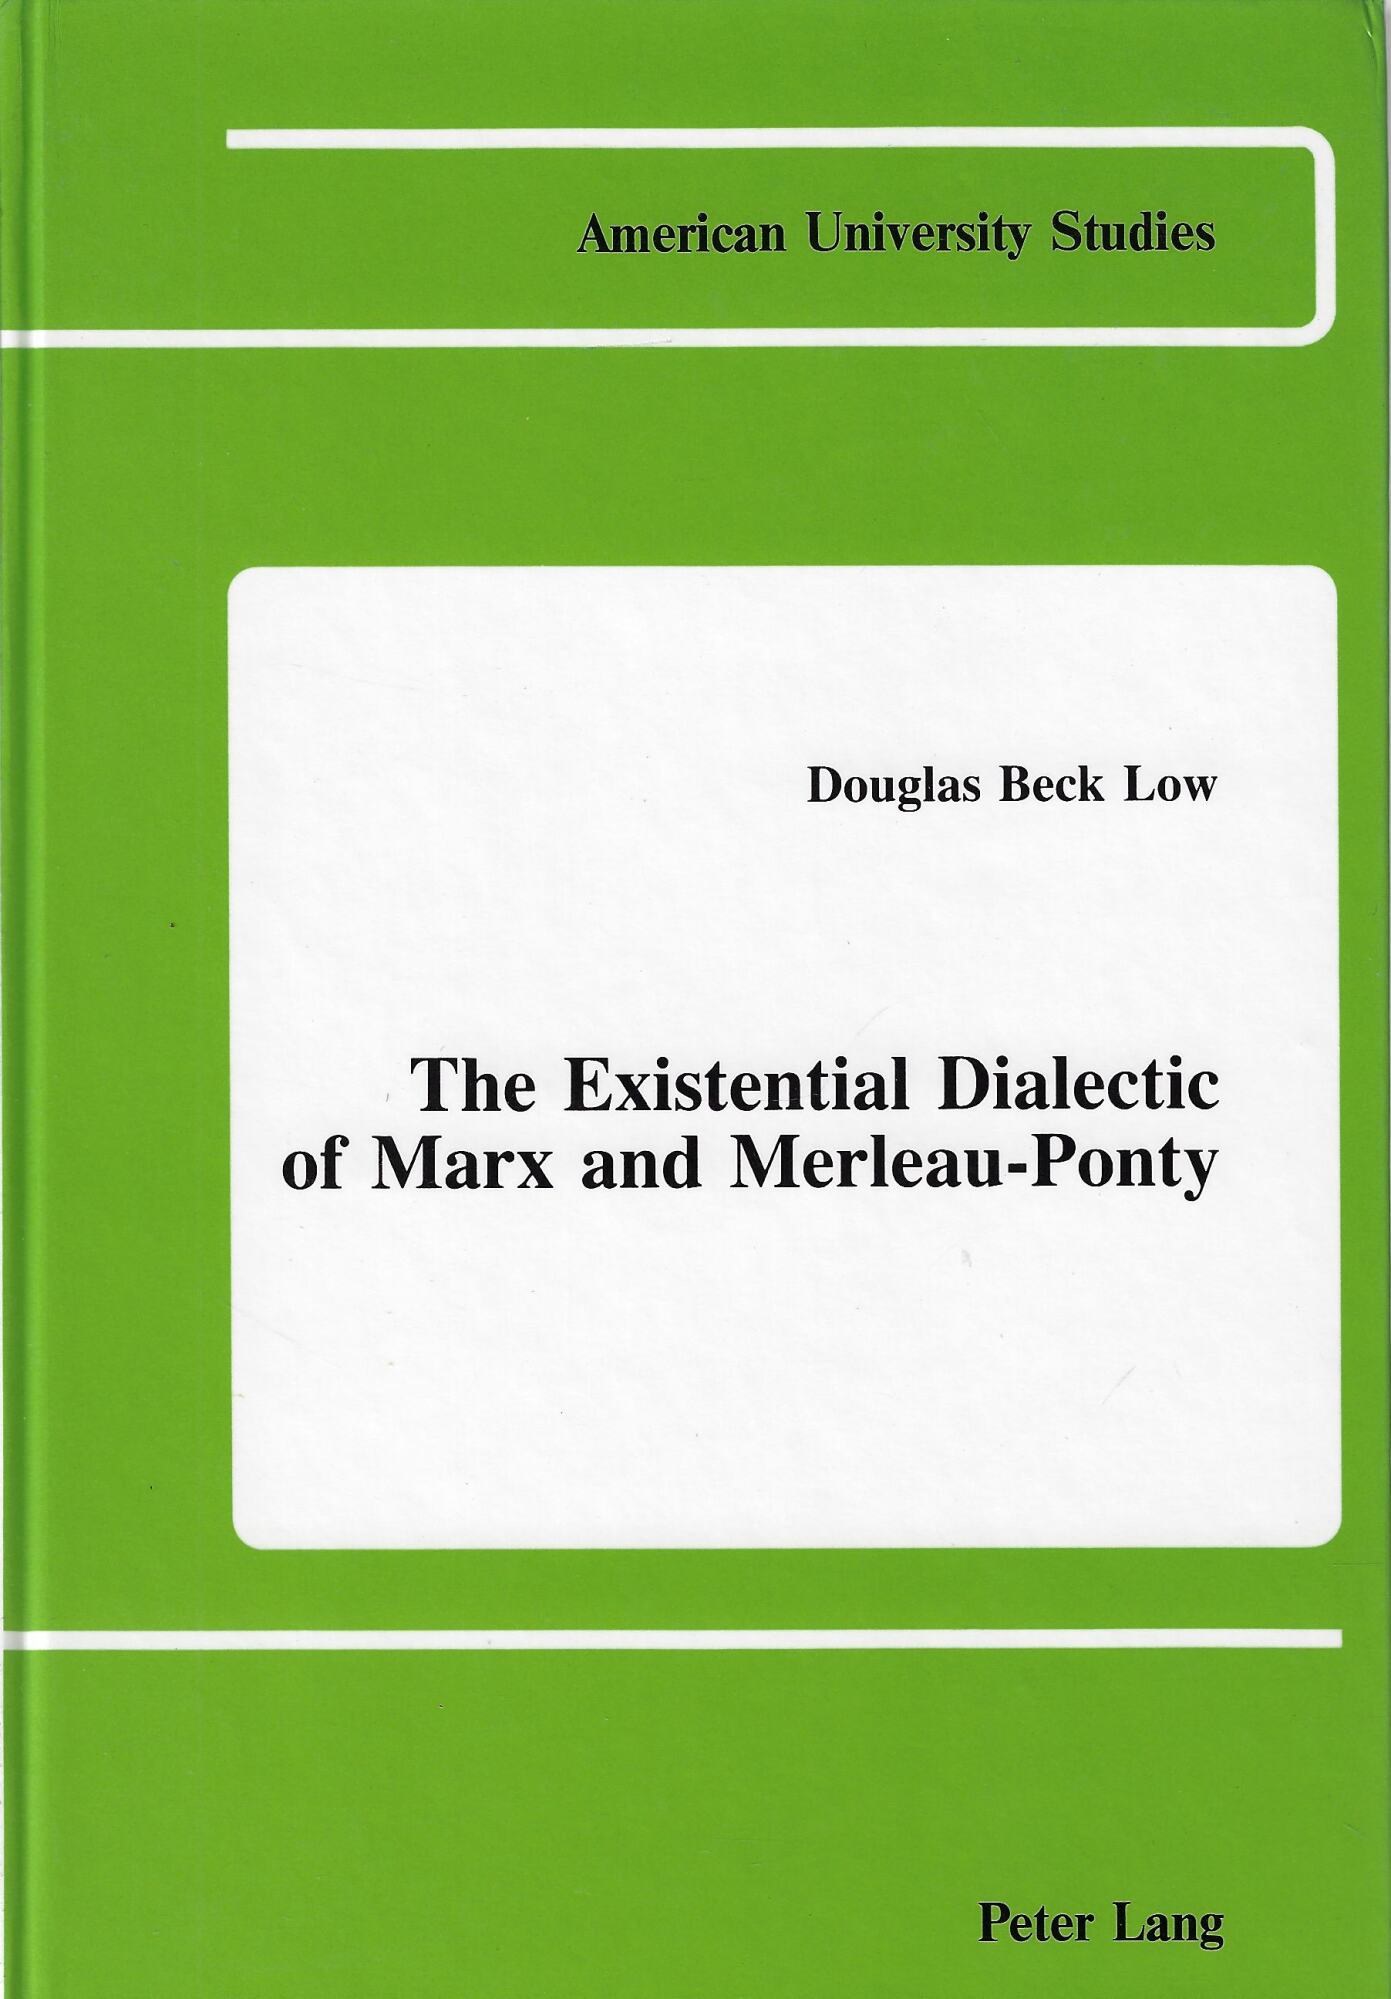 The Existential Dialectic of Marx and Merleau-Ponty